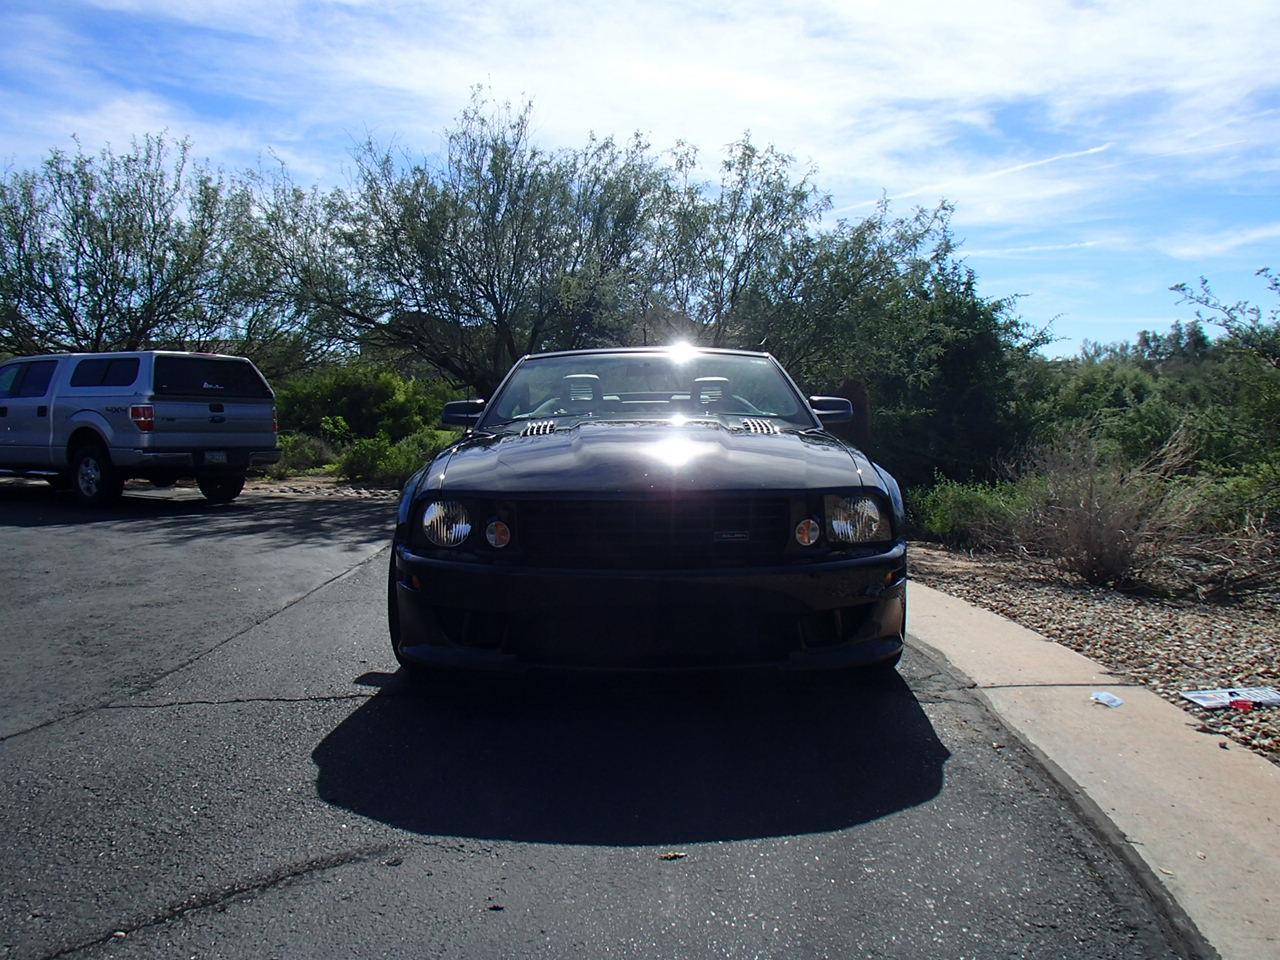 2007 Ford Mustang (Saleen) for sale in Cave Creek, AZ